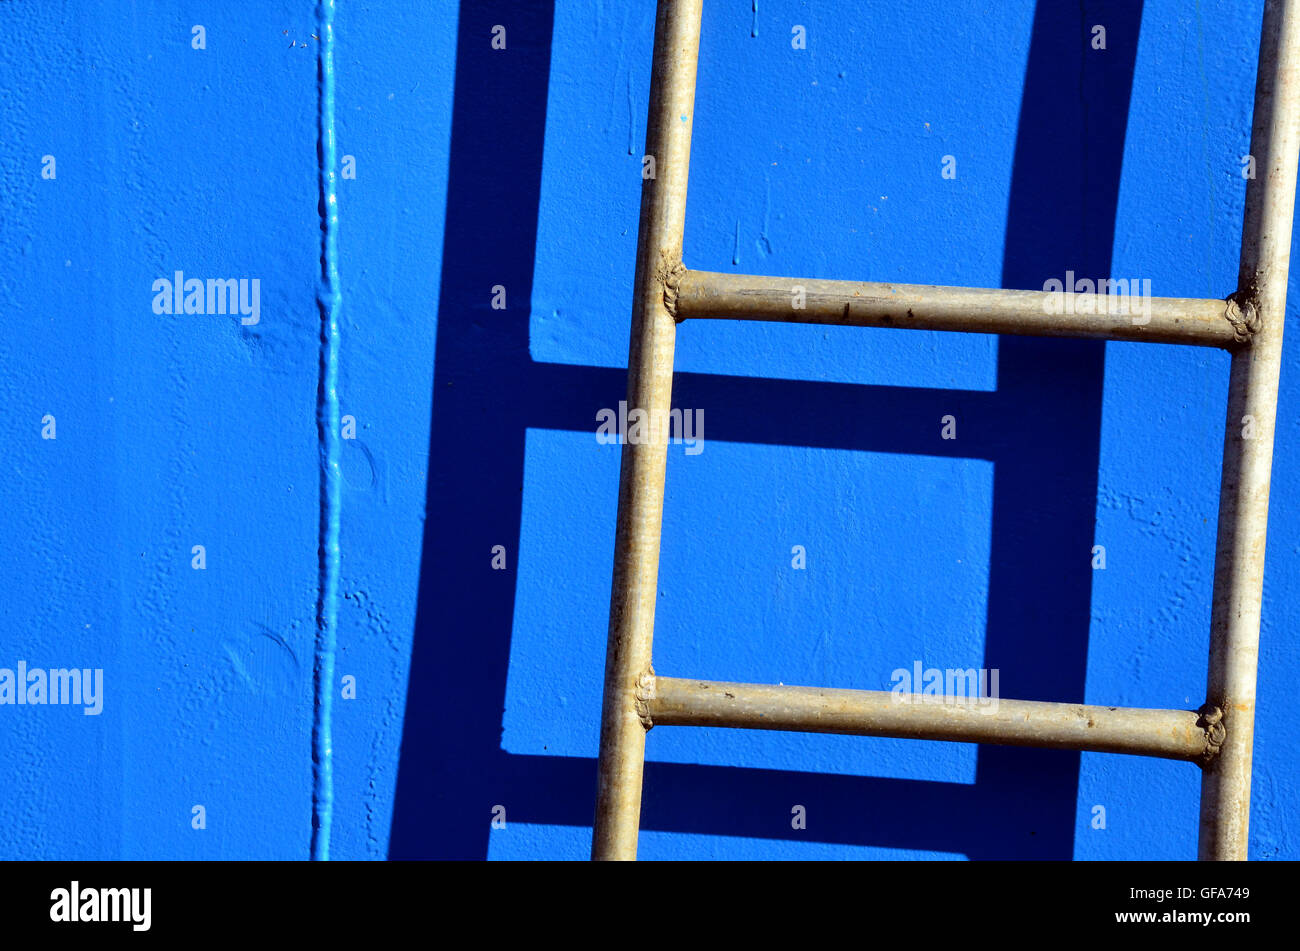 Closeup of ladder and its shadow on the blue side of a boat Stock Photo